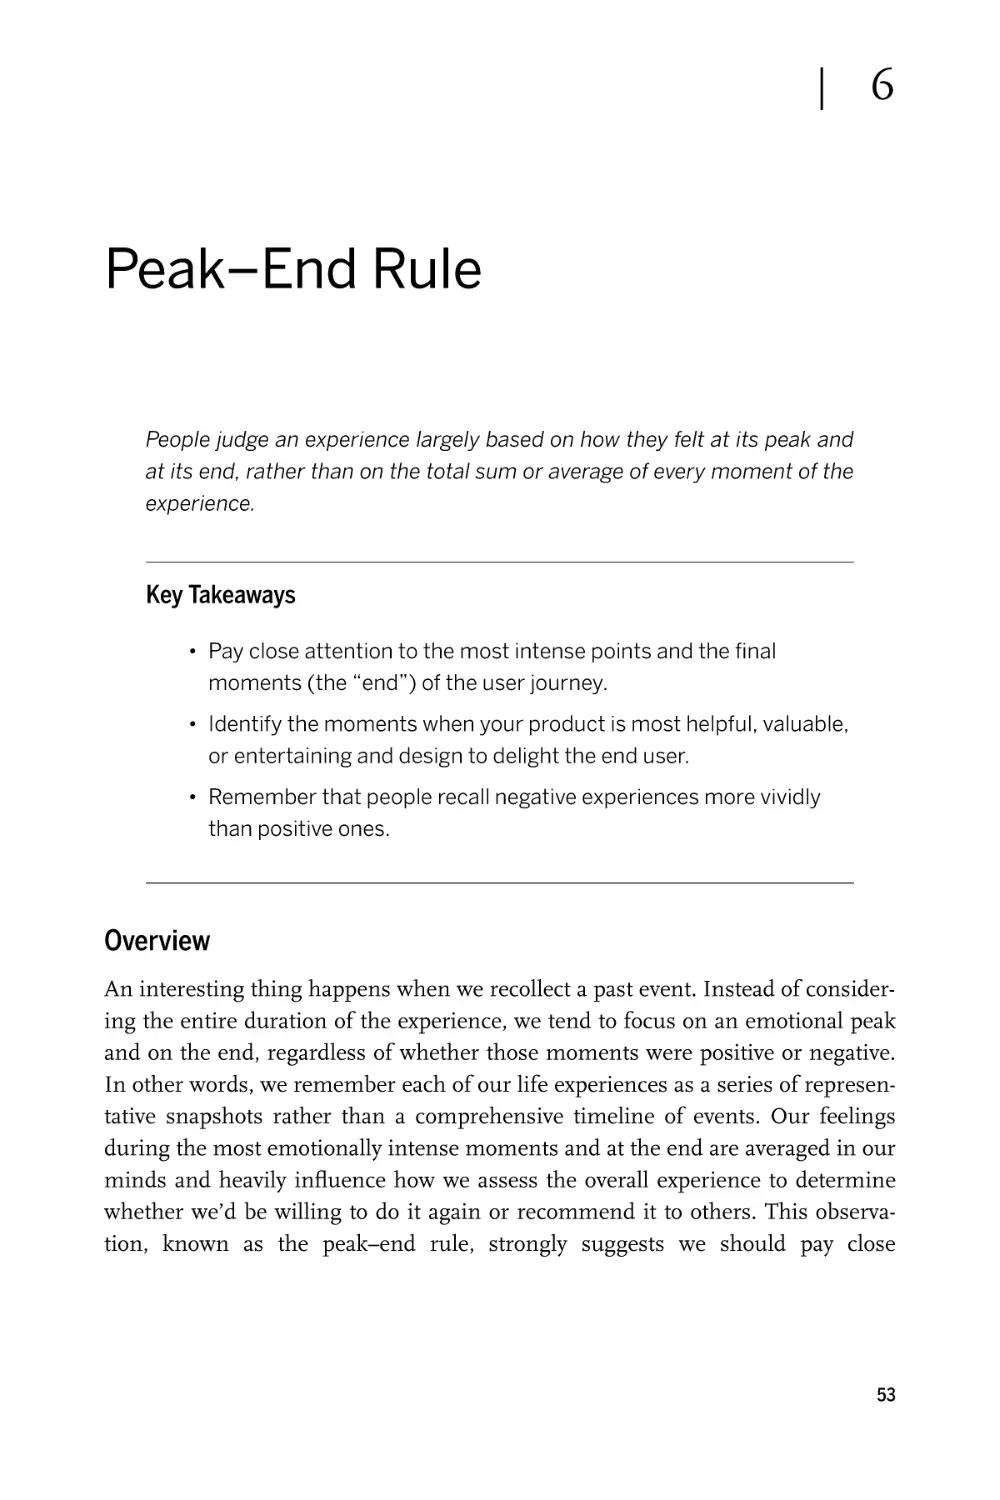 Chapter 6. Peak–End Rule
Overview